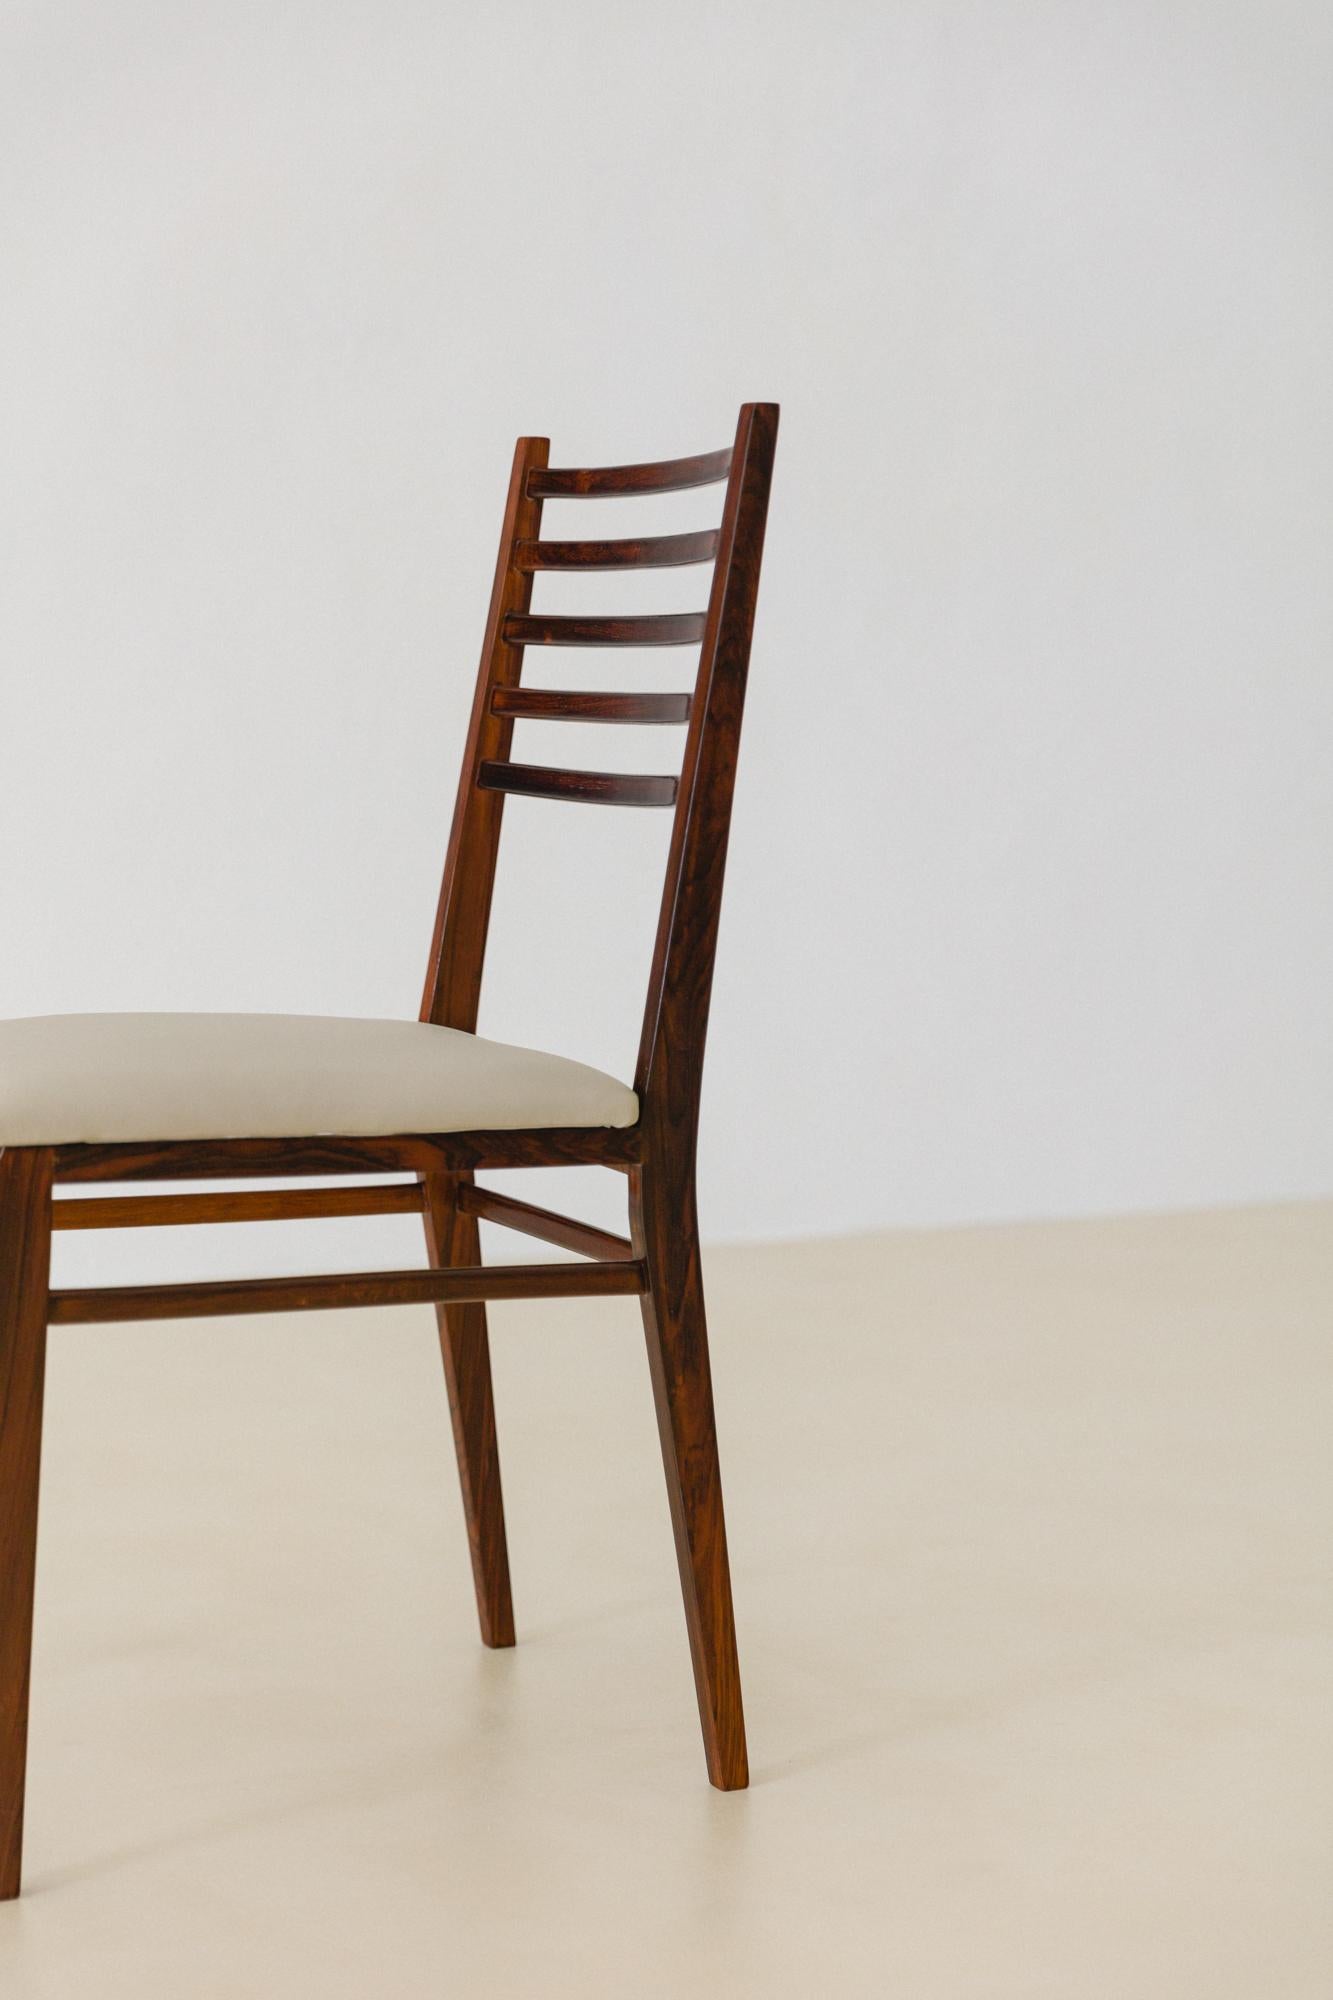 South American Set of Six Chairs in Rosewood, Model 4015 by Geraldo de Barros, Unilabor, 1950s For Sale